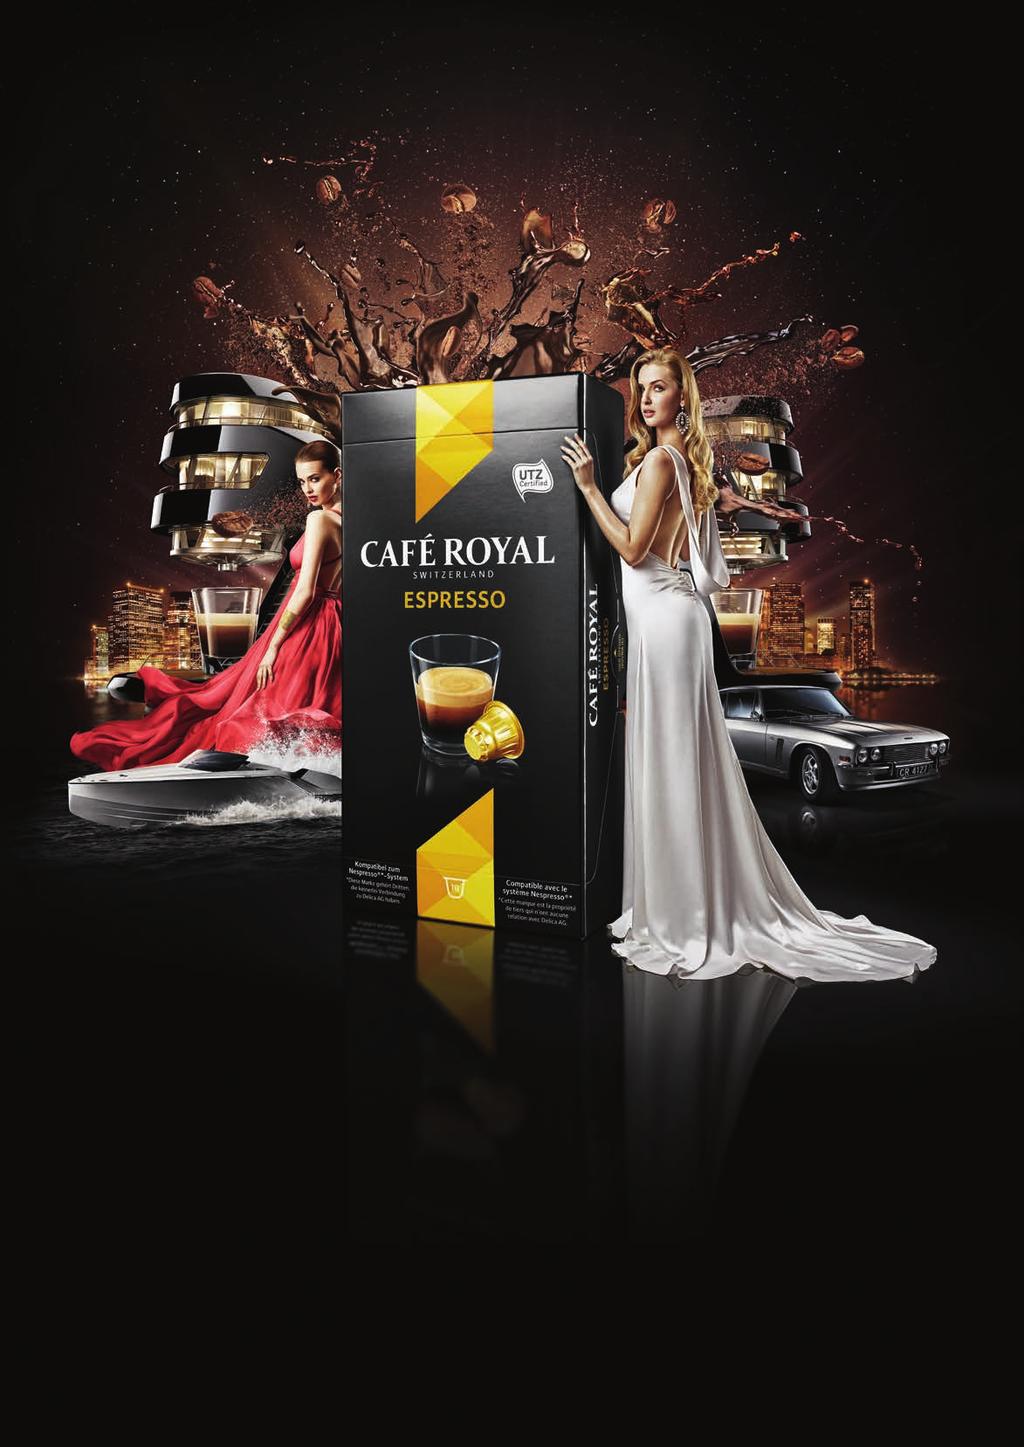 Royal. Café Royal the smart capsule alternative is compatible with the Nespresso *system, sealed to preserve aroma and compactly packaged. But more than anything else, it is delicious.